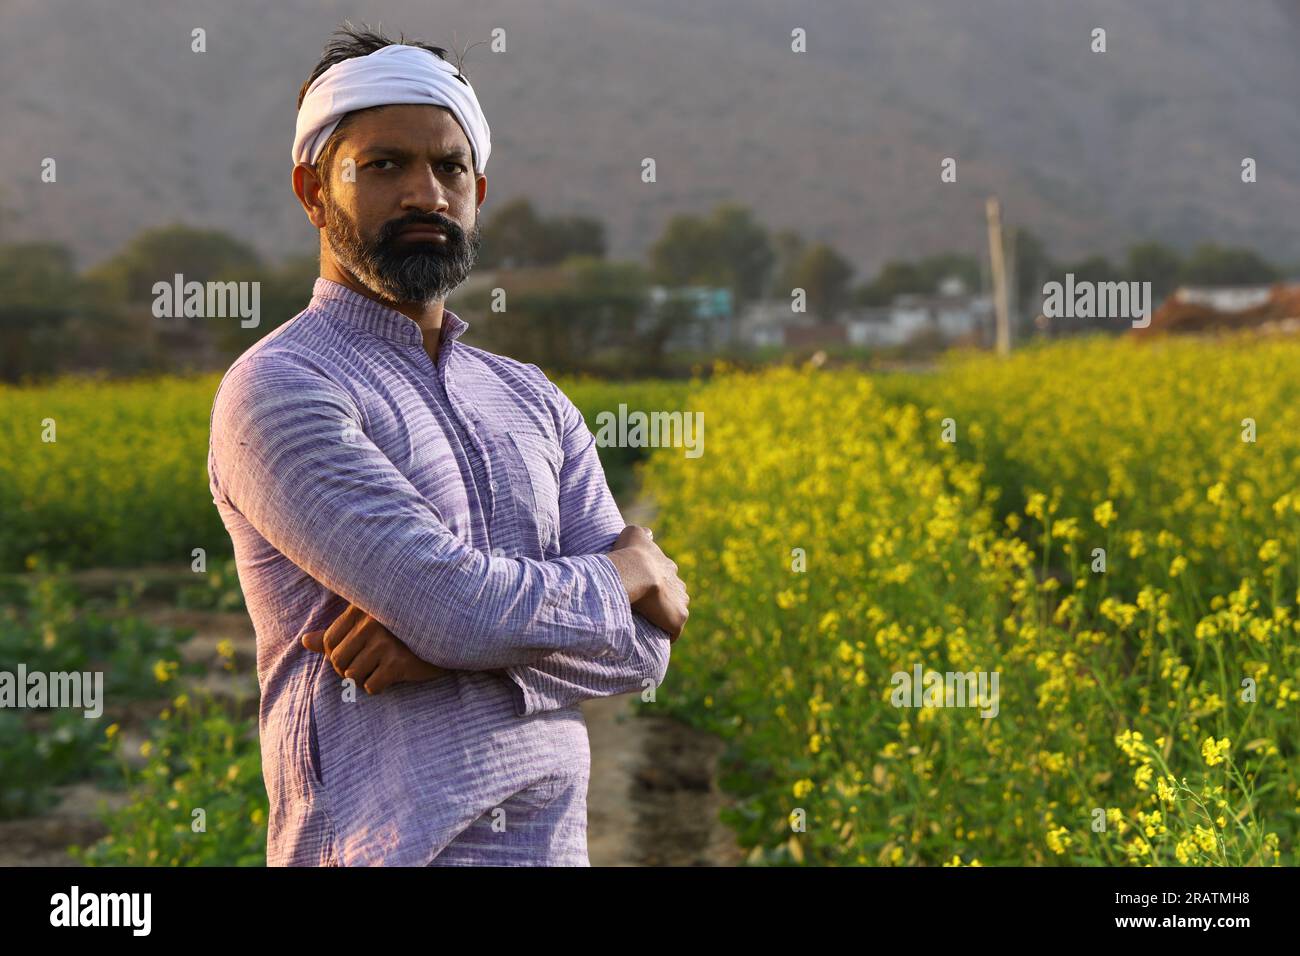 Farmer feeling proud of his effort that he did for growth of his field. Beautiful portrait of Indian rural happy farmer standing in mustard field. Stock Photo